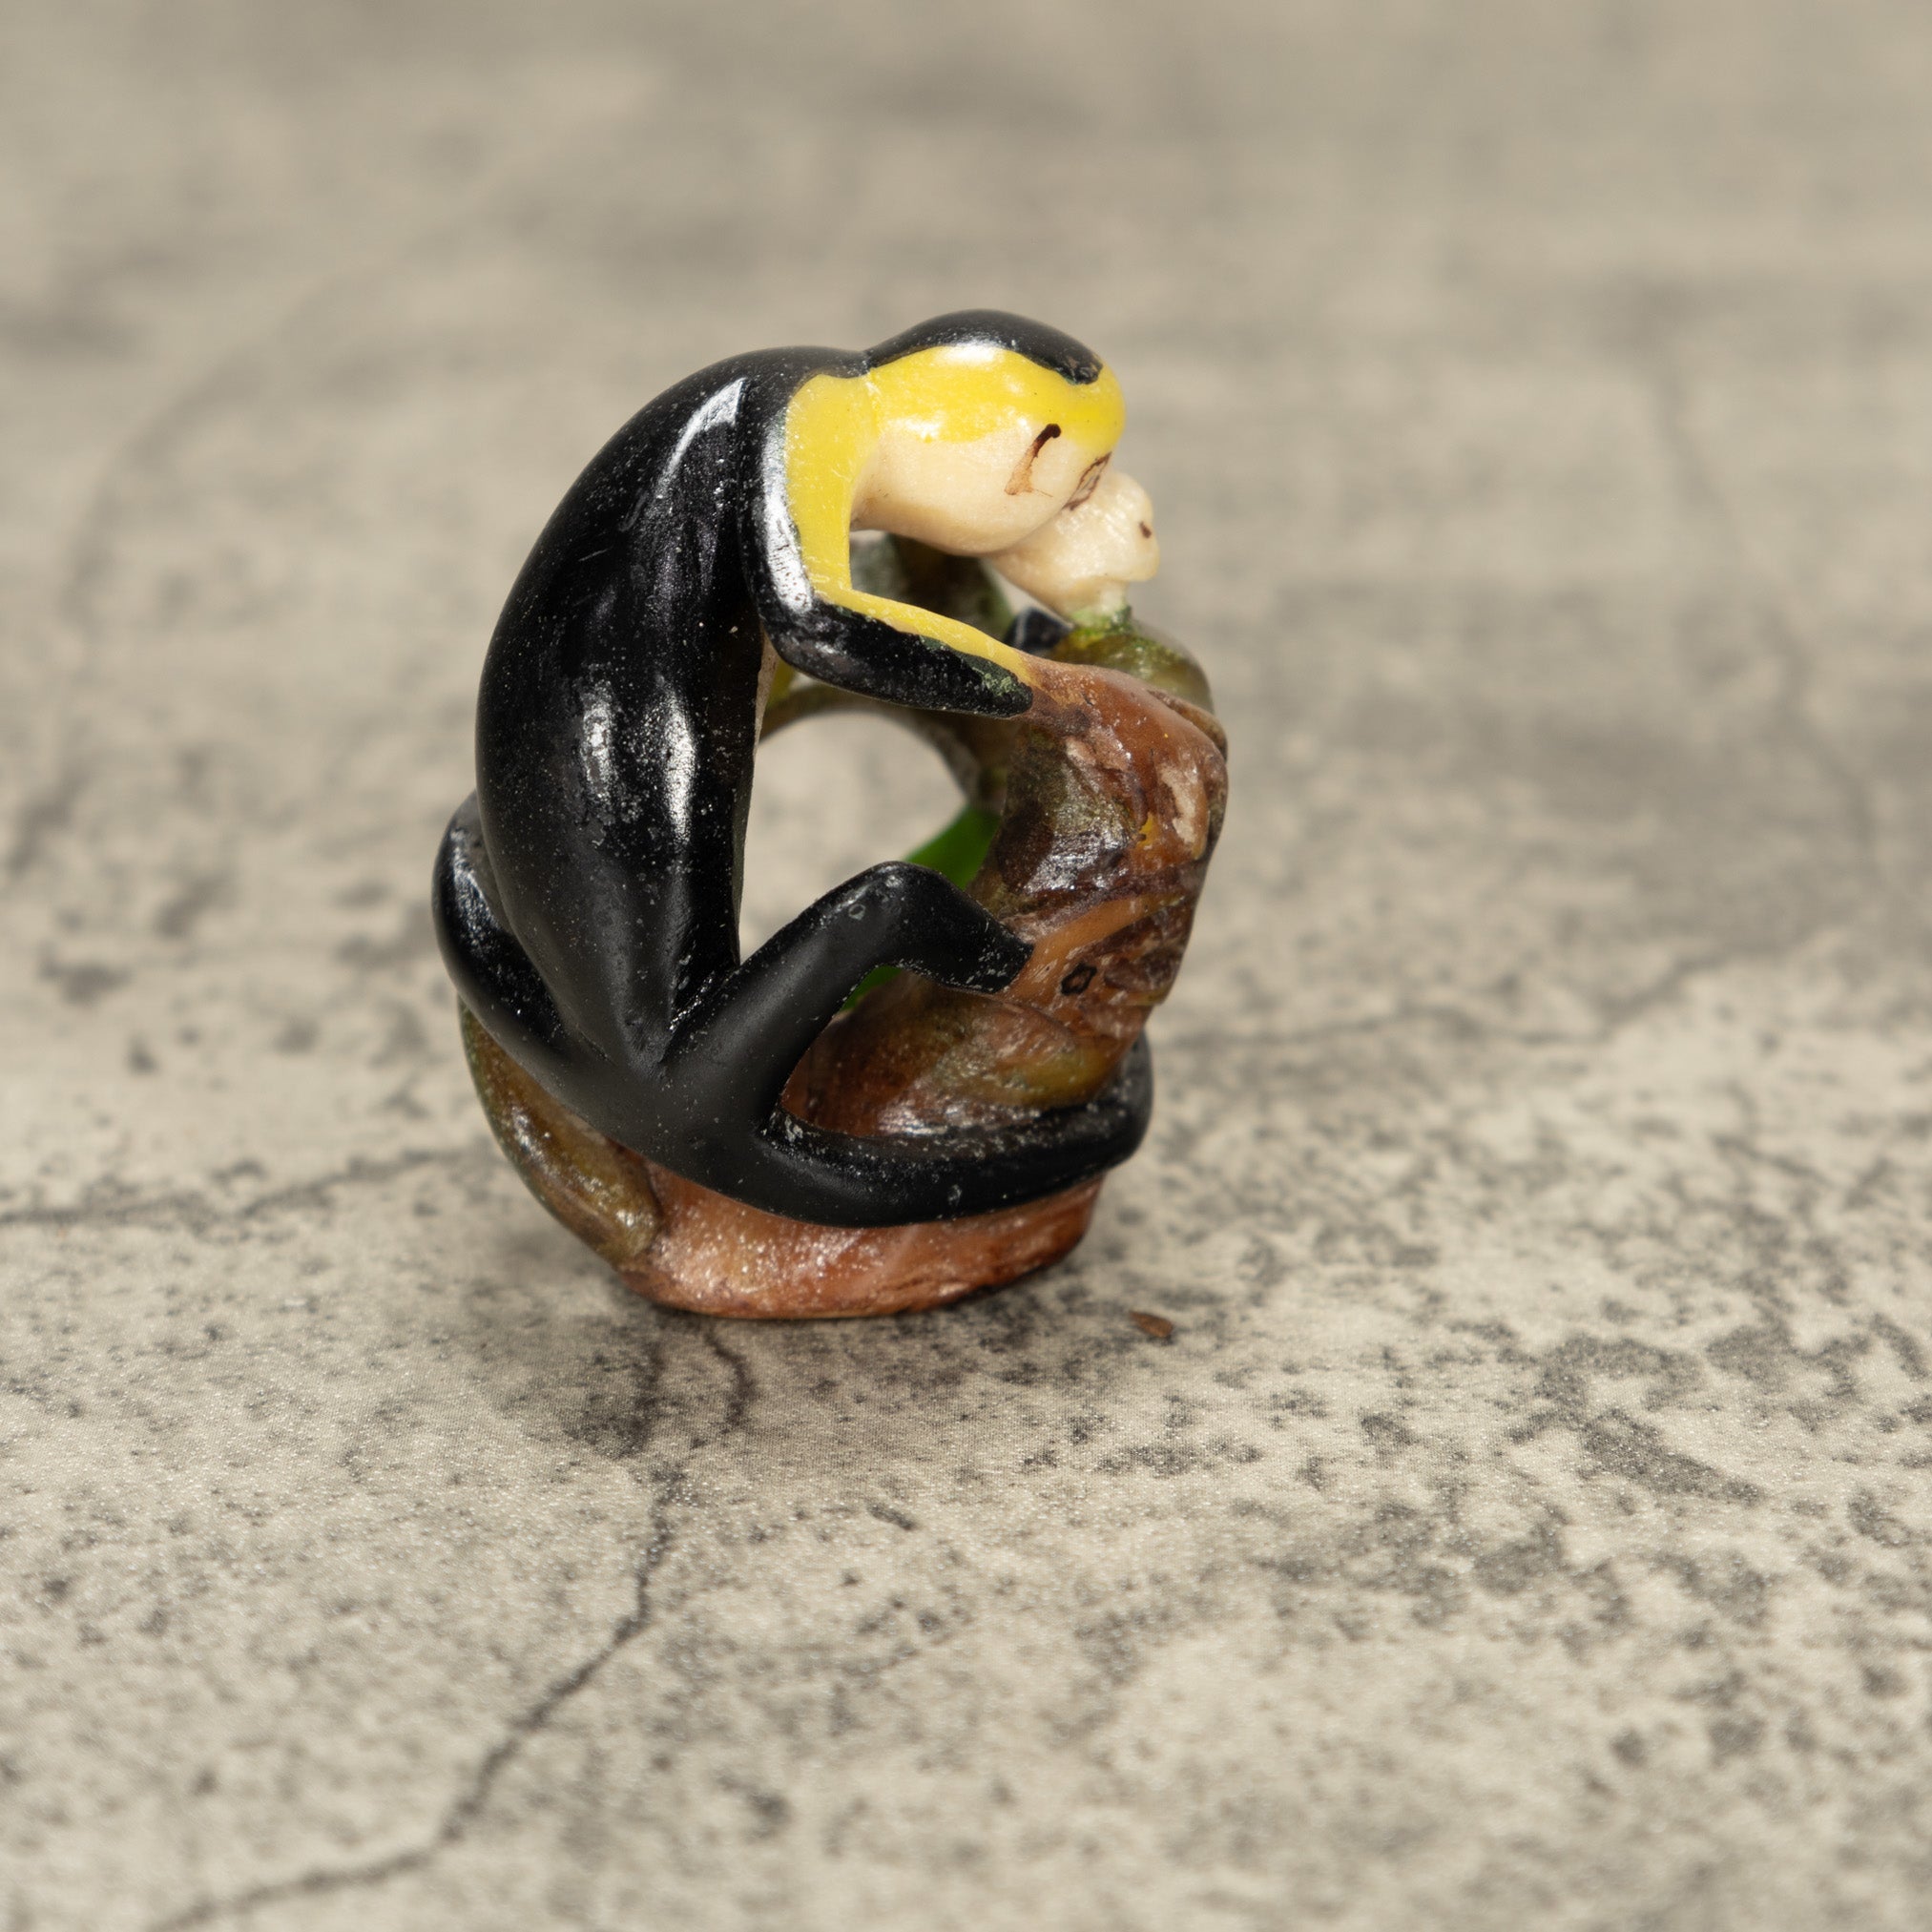 White Face Monkey Tagua Nut Carving